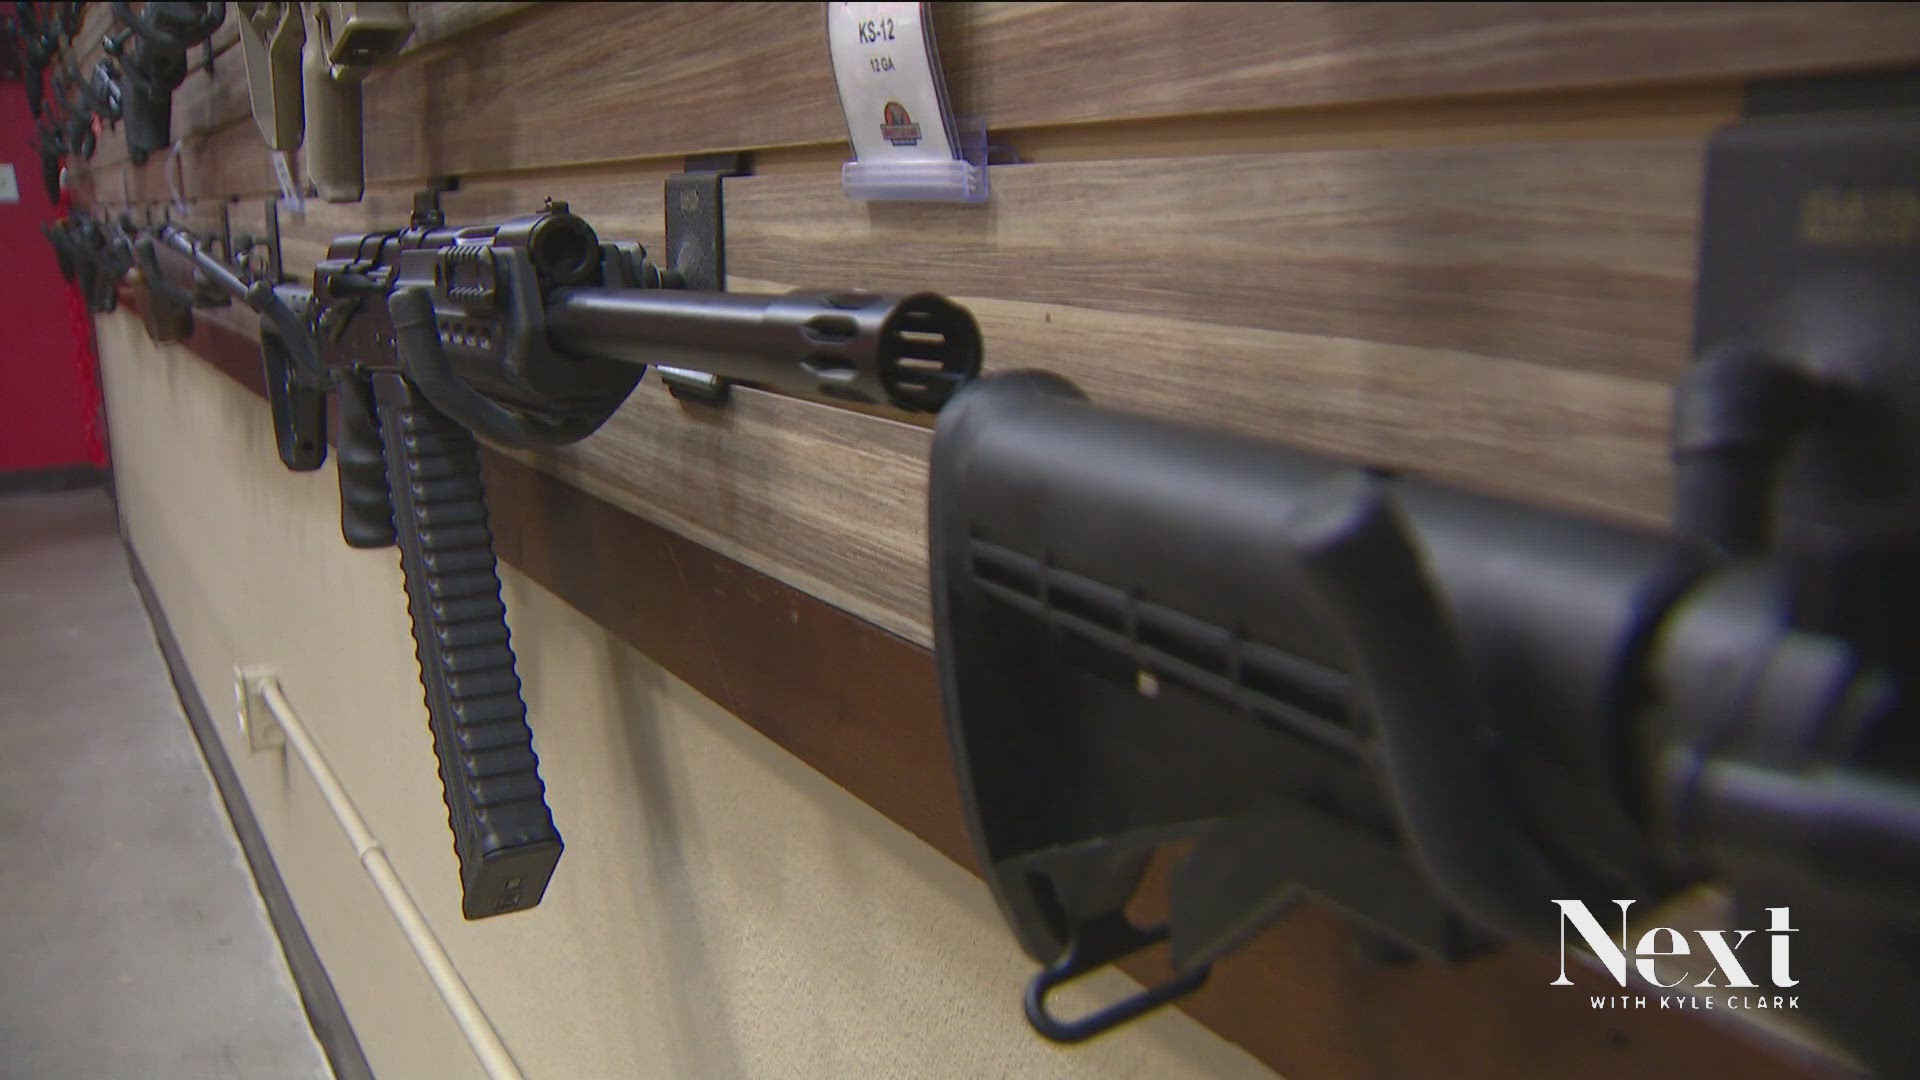 How do Colorado lawmakers looking to ban assault weapons, define an assault weapons?